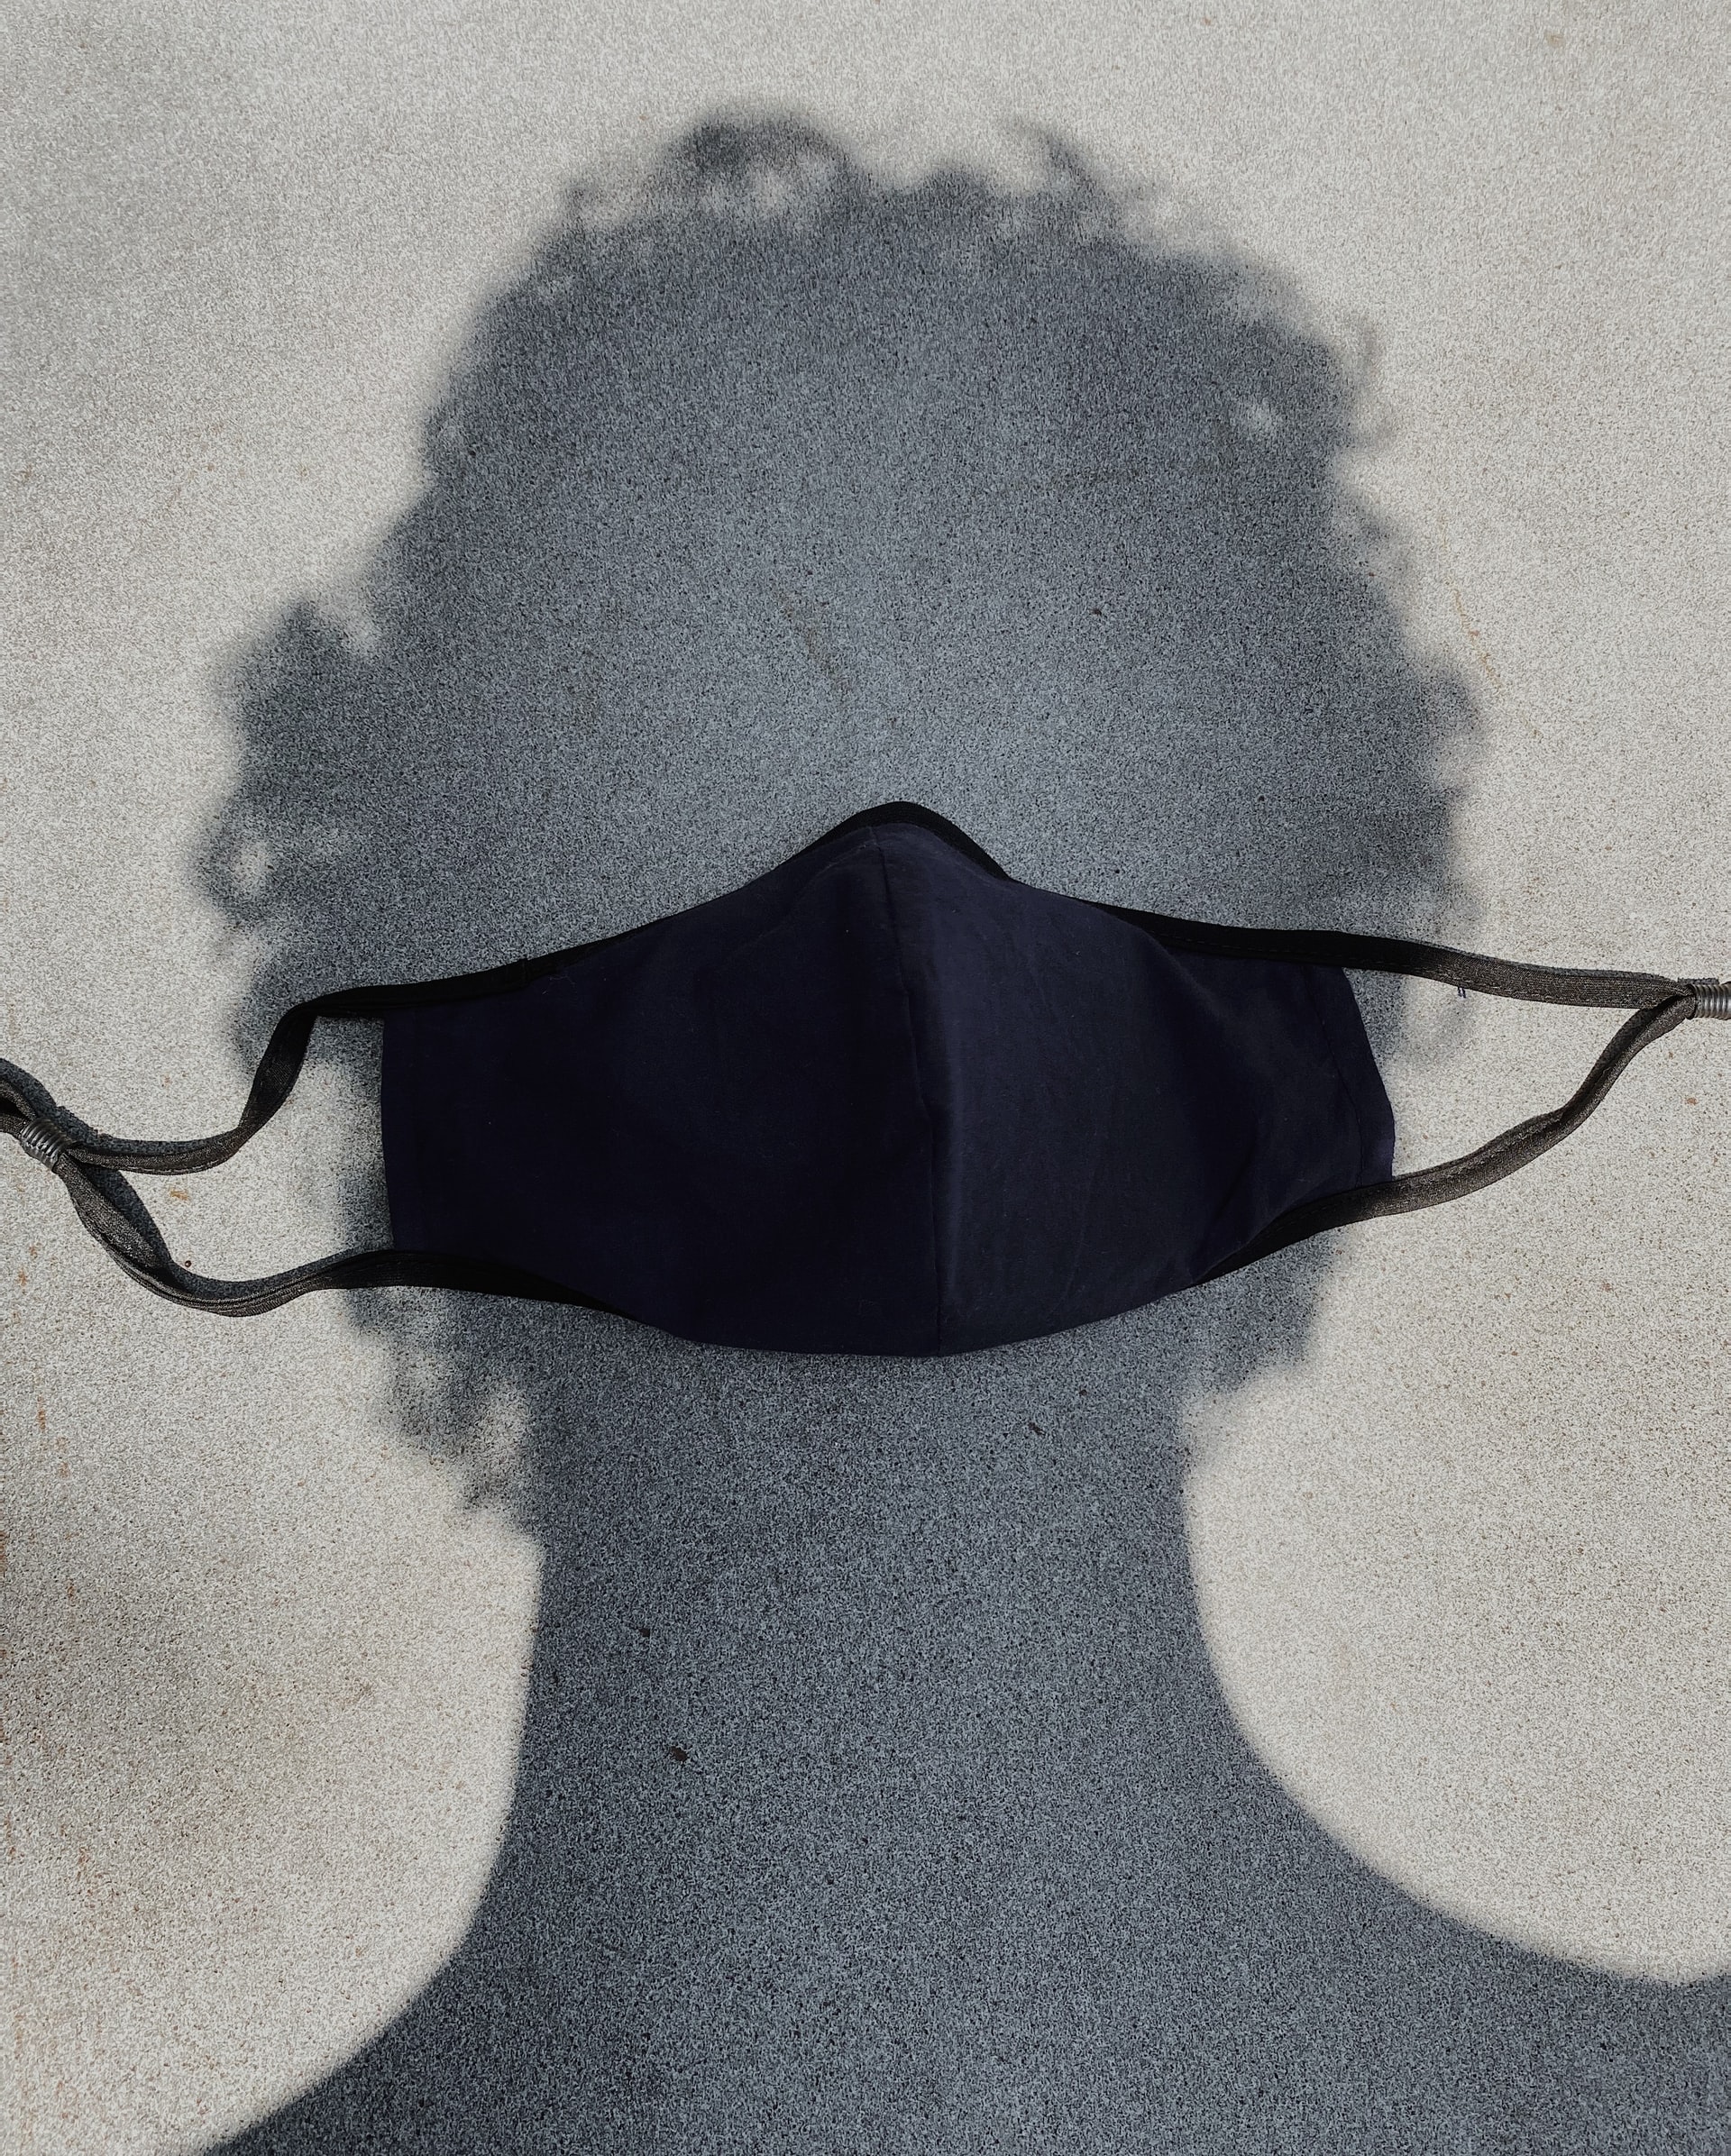 A black mask on a person's head's shadow on a gray background